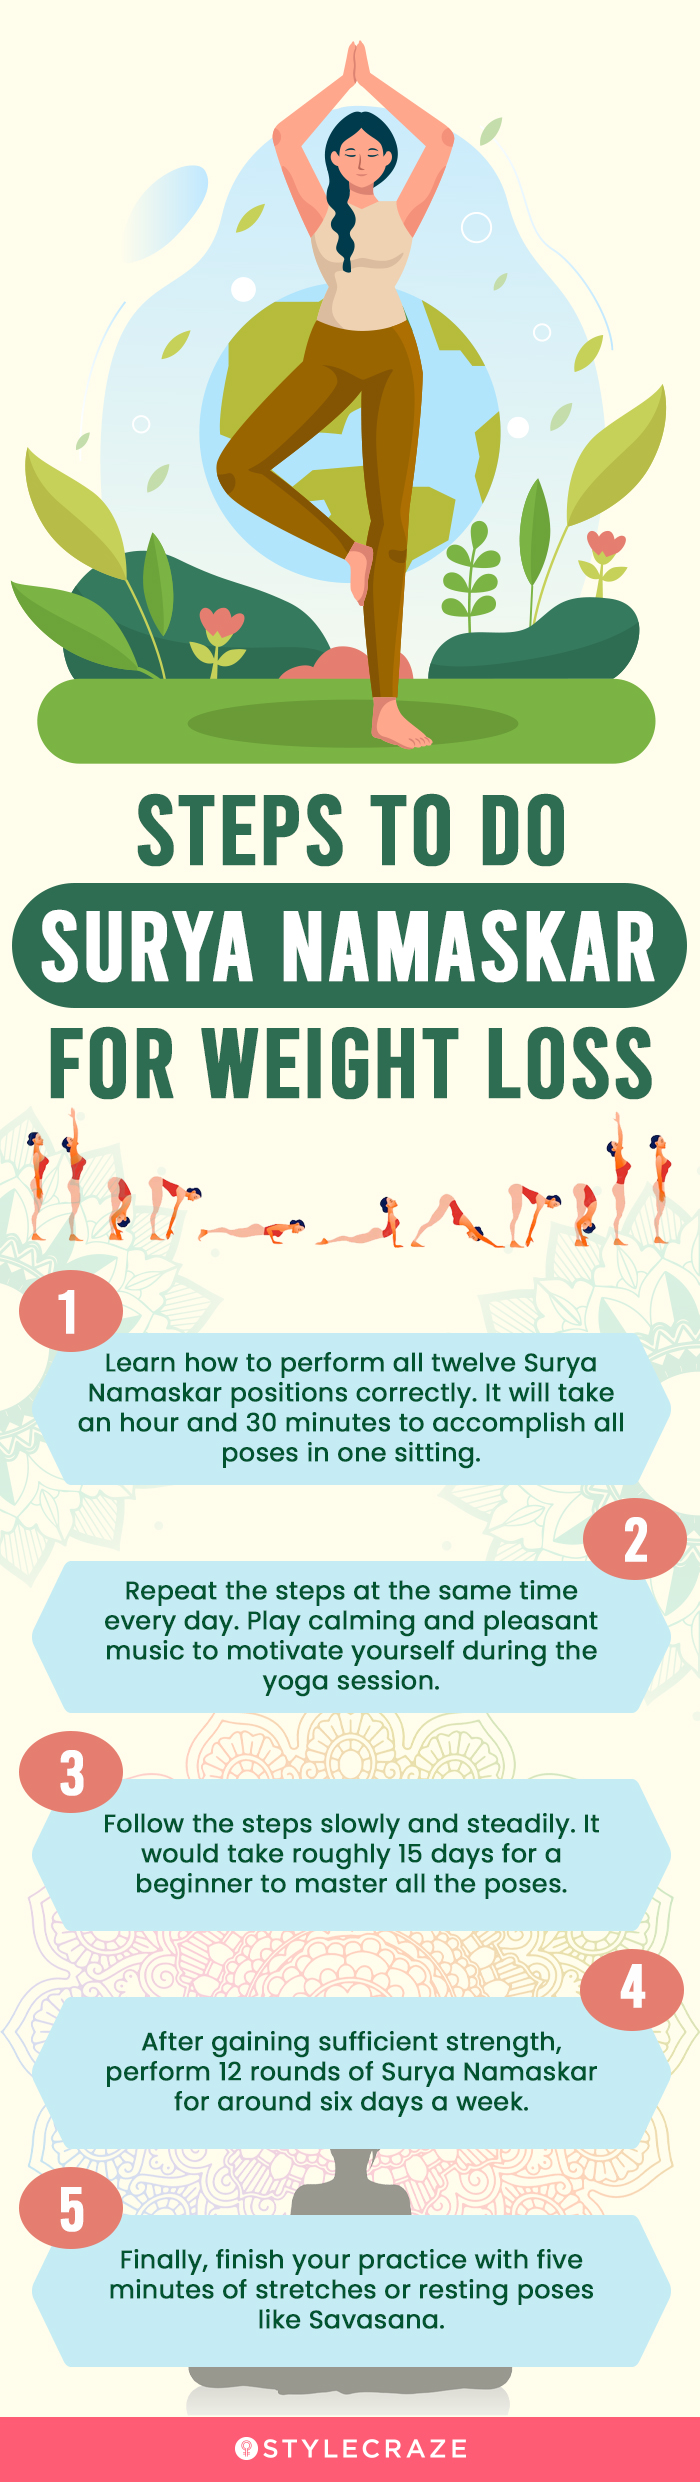 steps to do surya namaskar for weight loss [infographic]